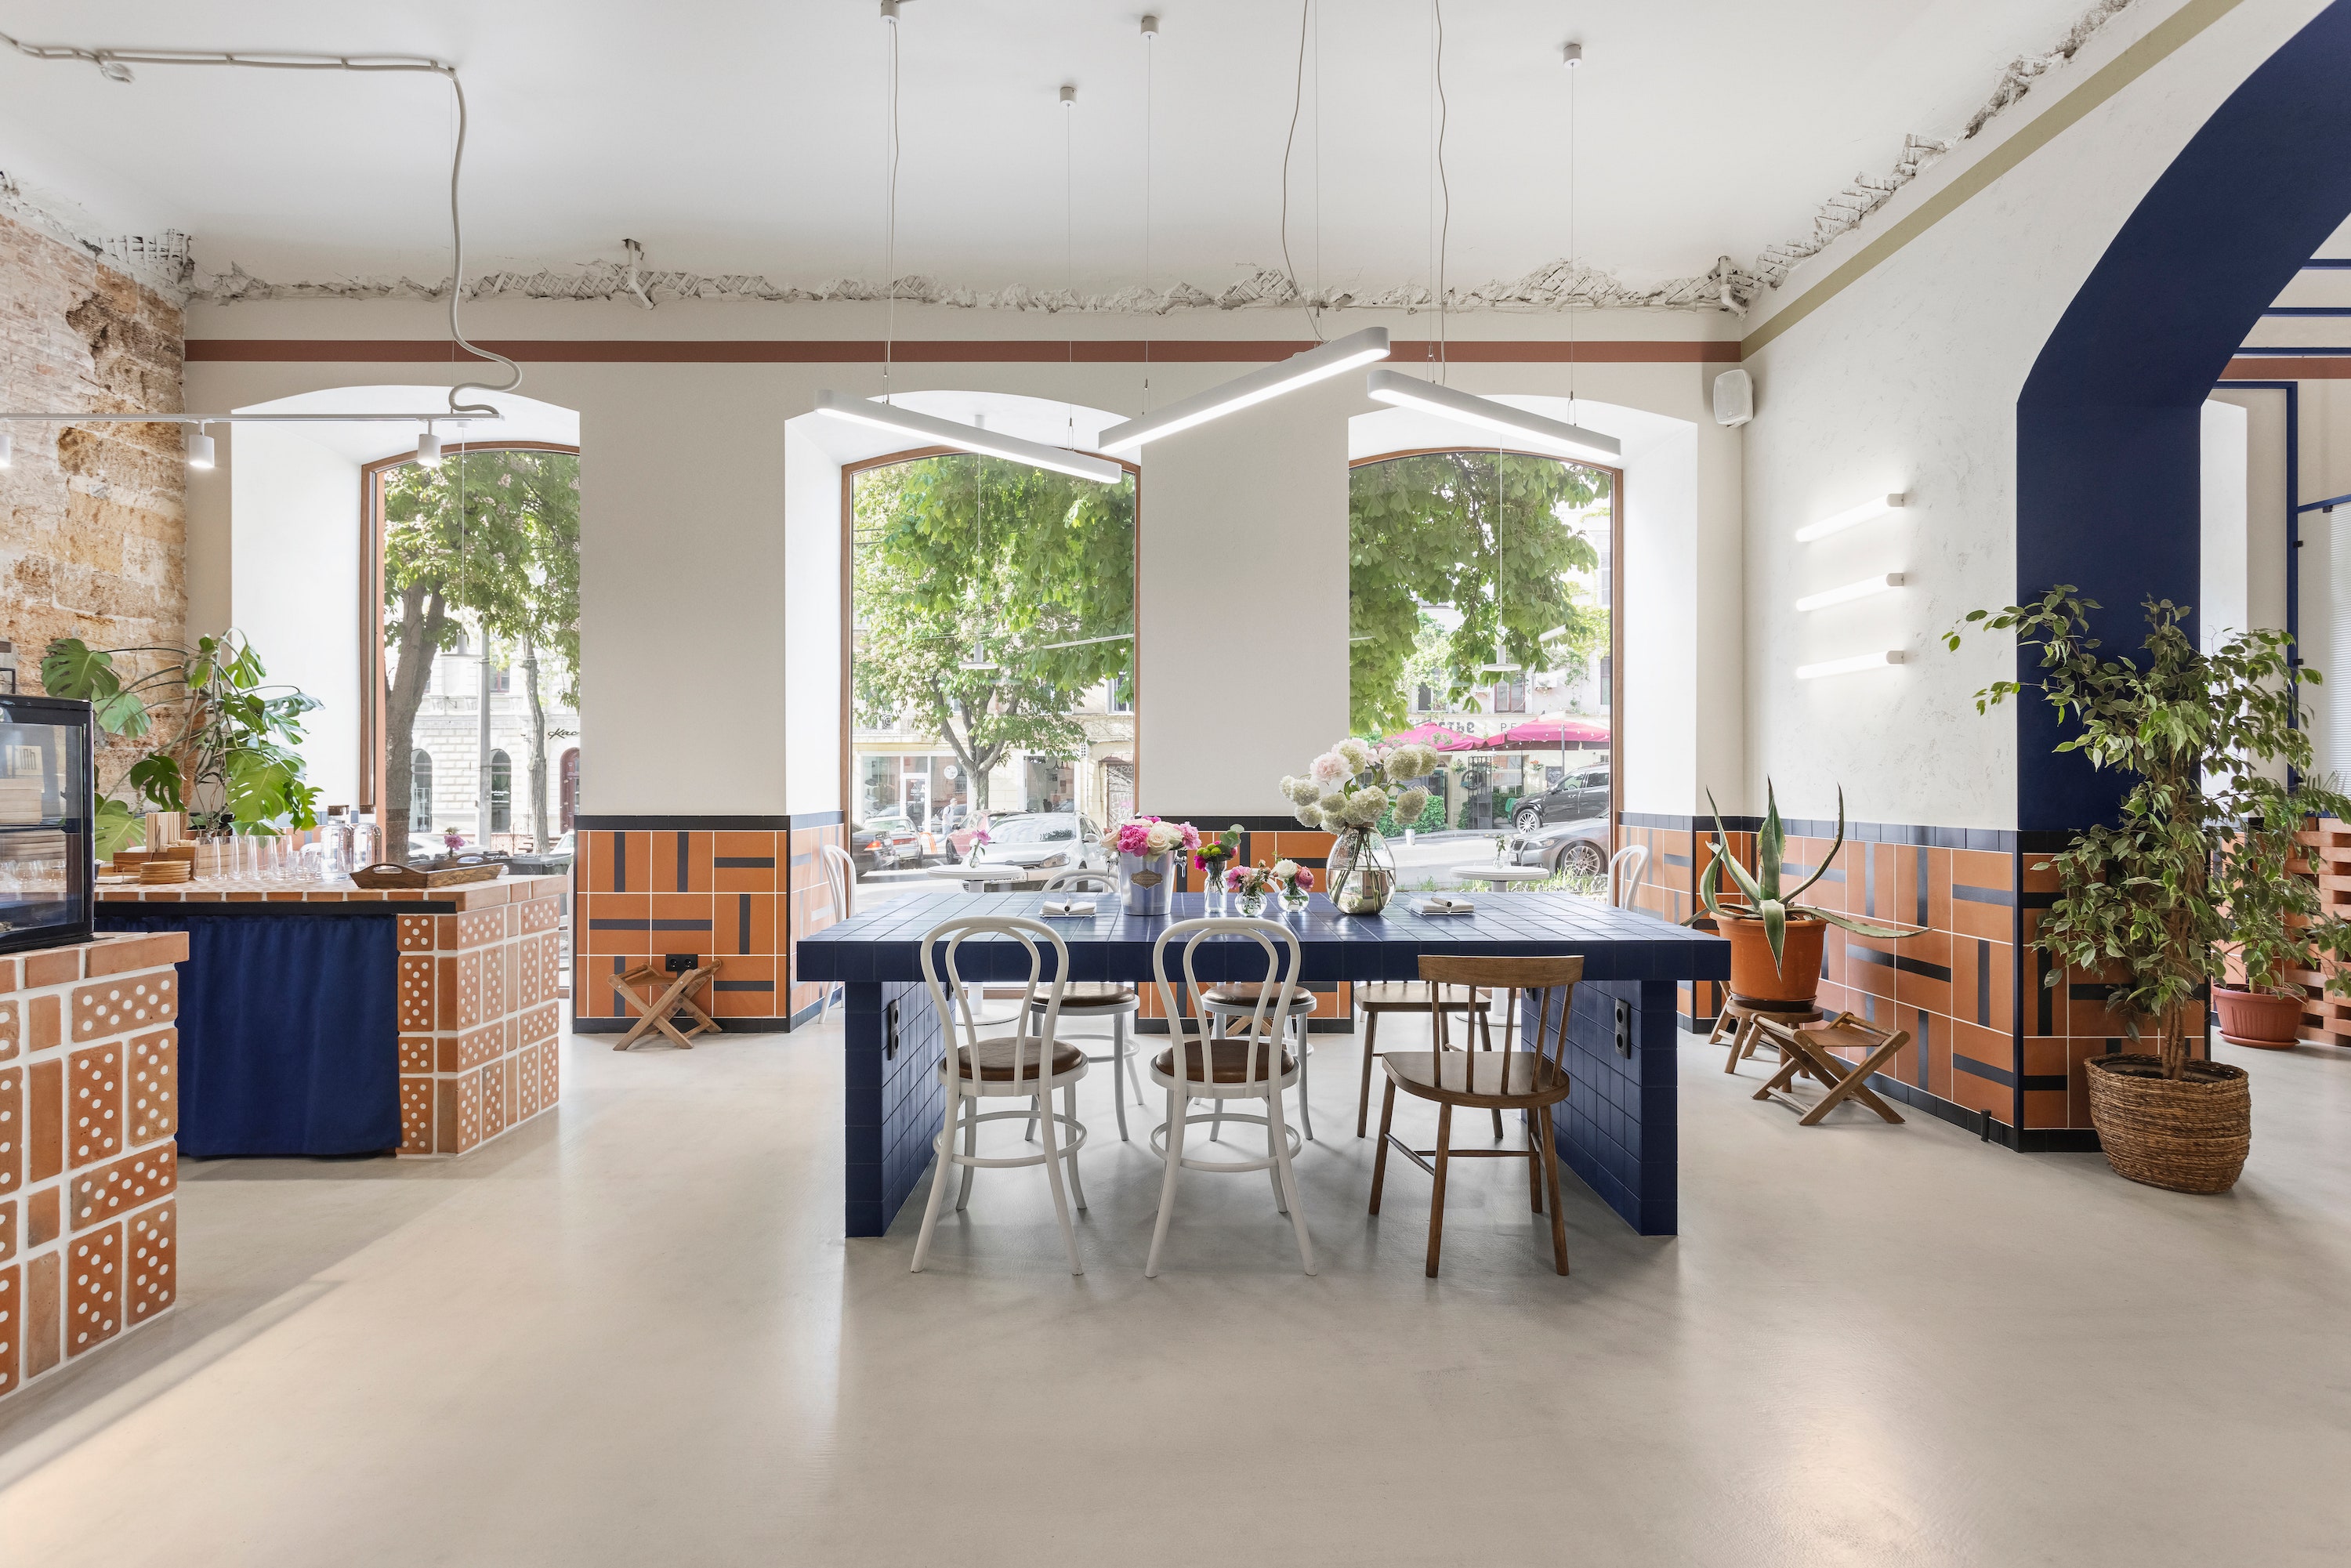 Bauhaus design inspired the interiors of <a href="https://www.instagram.com/godshot_coffee_odesa/?hl=en">Godshot Coffee</a> in Odesa, Ukraine. <a href="https://www.instagram.com/petrossjan_architecture/">Petrossjan Architecture Studio</a> used a bold but limited palette of vivid blue, white, and red brick and left the layout of the space open and preserved elements of the original architecture, such as the stone wall behind the bar. Hollow brick benches snake along the walls along with hand painted tiles, and a blue-tiled communal table was designed for freelancers in need of a workspace complete with built-in outlets.<p>Sign up for our newsletter to get the latest in design, decorating, celebrity style, shopping, and more.</p><a href="https://www.architecturaldigest.com/newsletter/subscribe?sourceCode=msnsend">Sign Up Now</a>